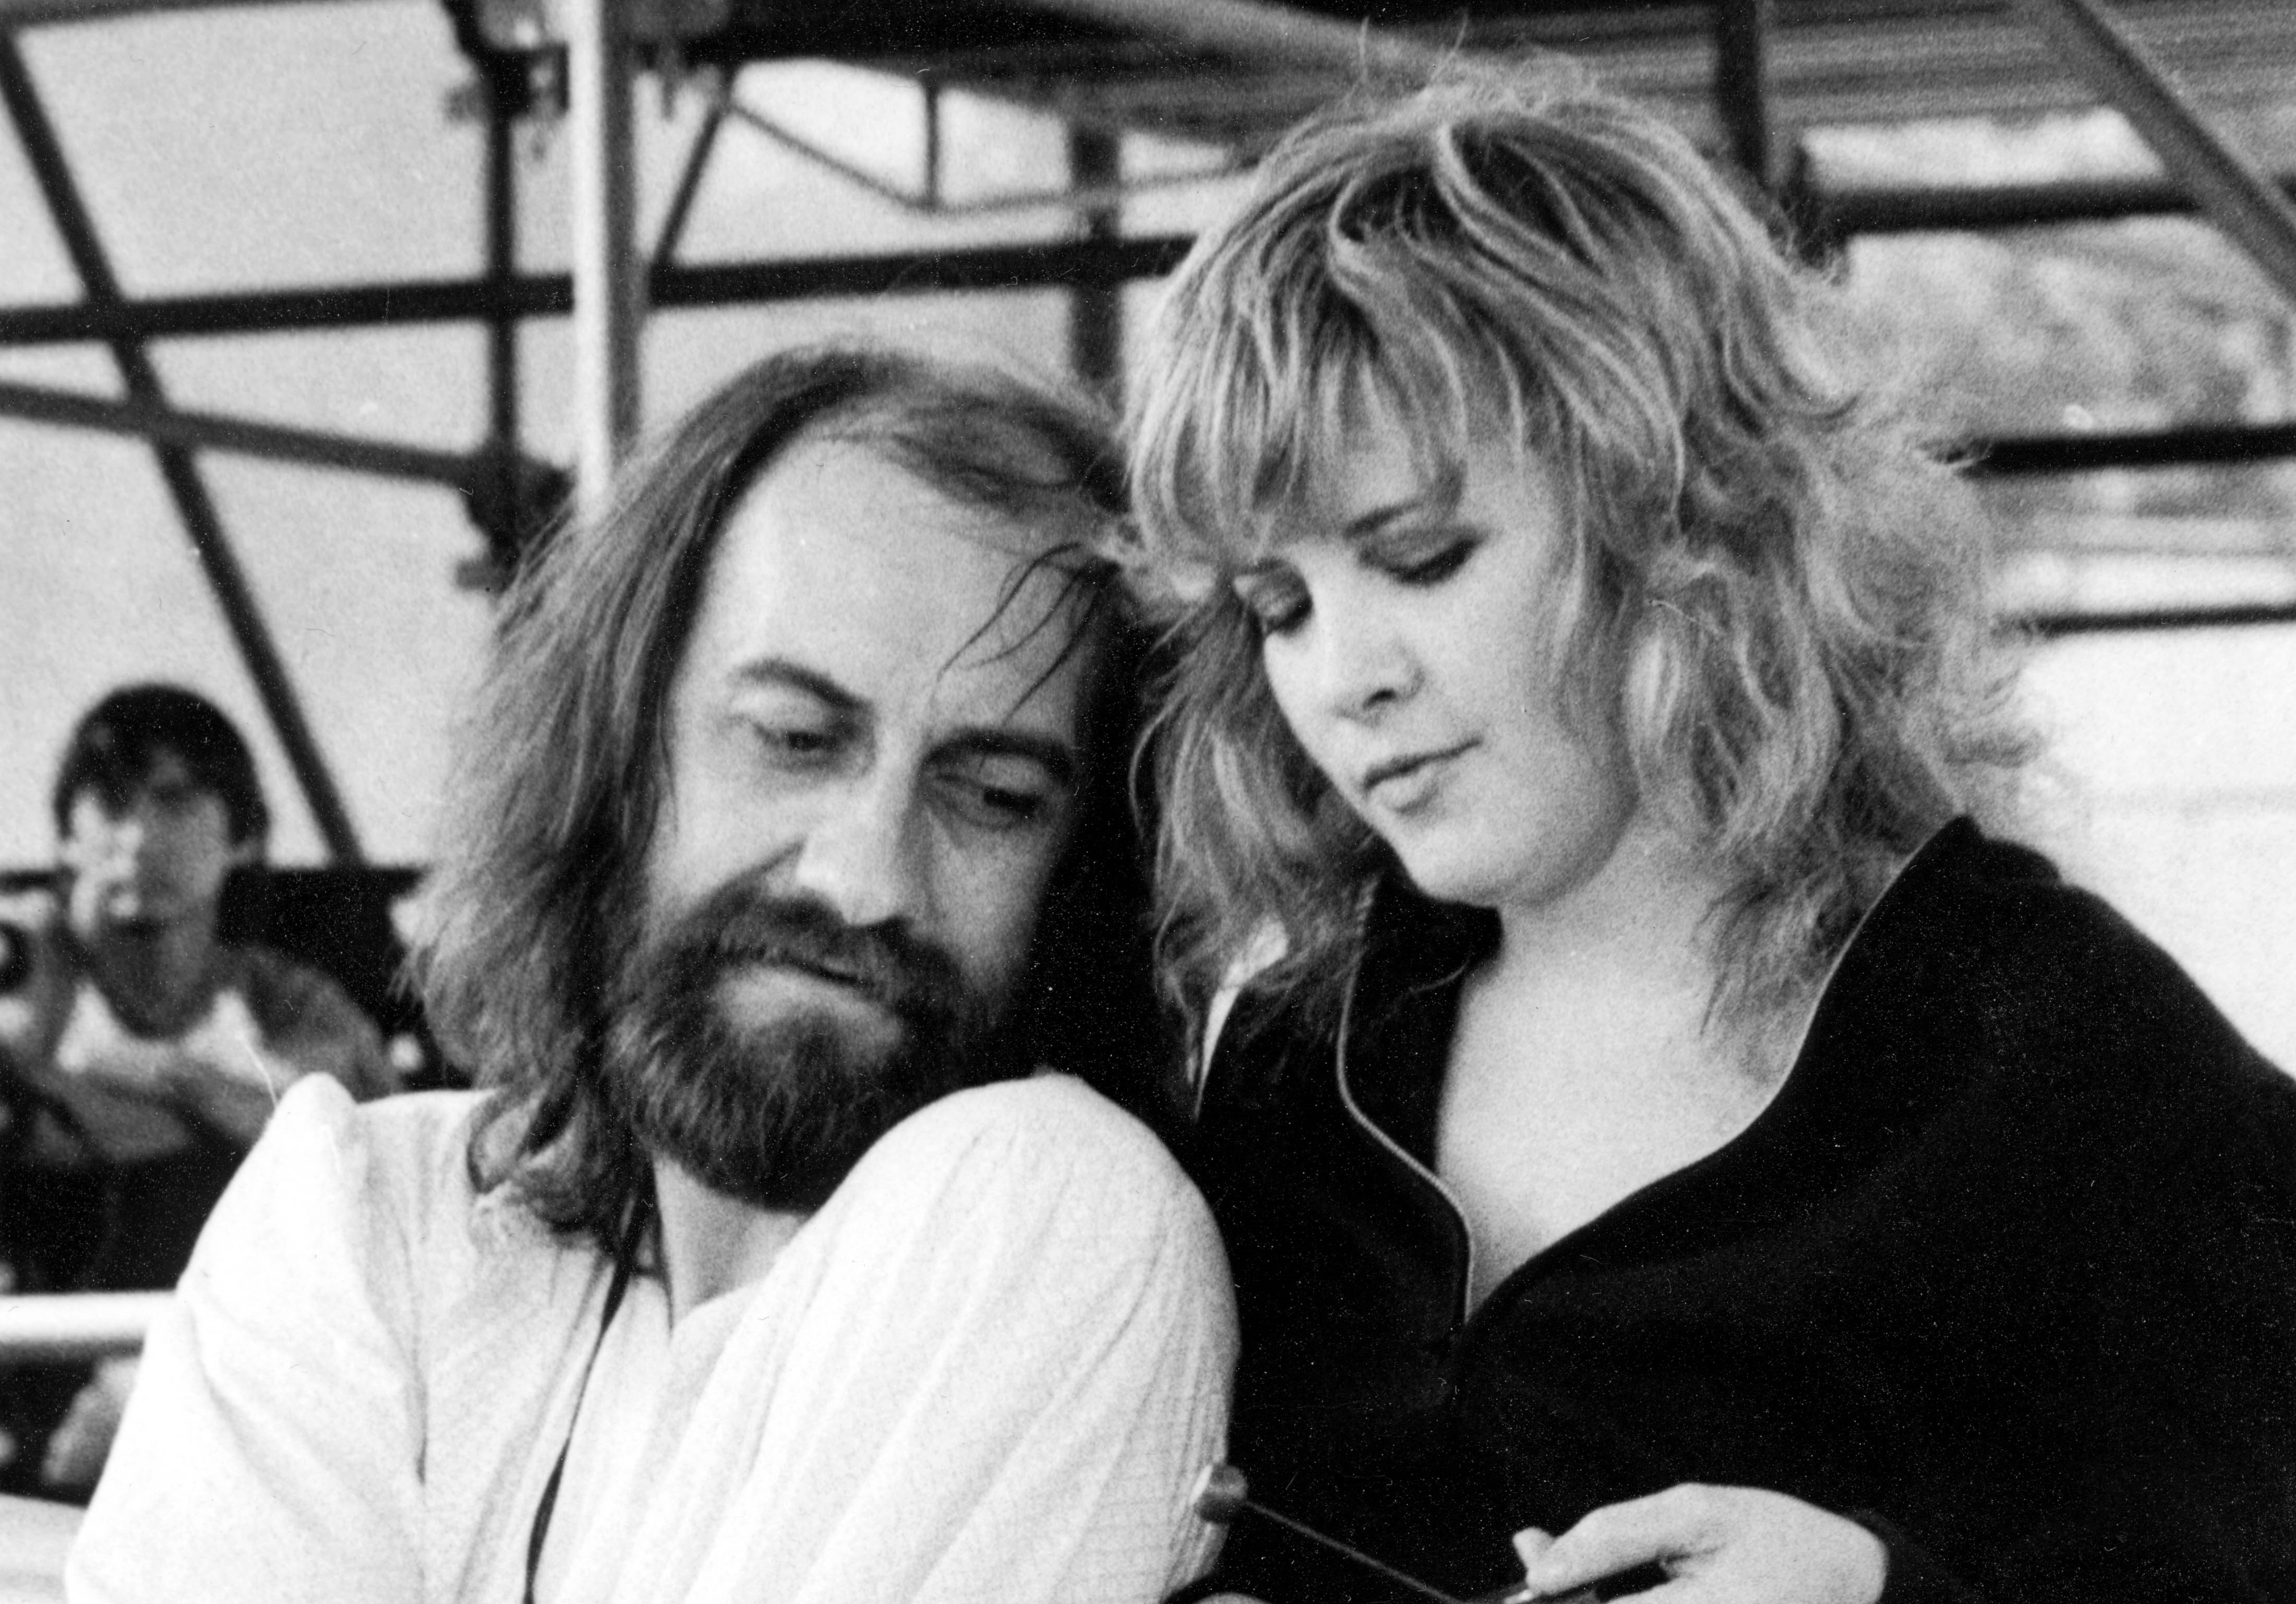 Mick Fleetwood sits at his drum set and Stevie Nicks stands behind him.